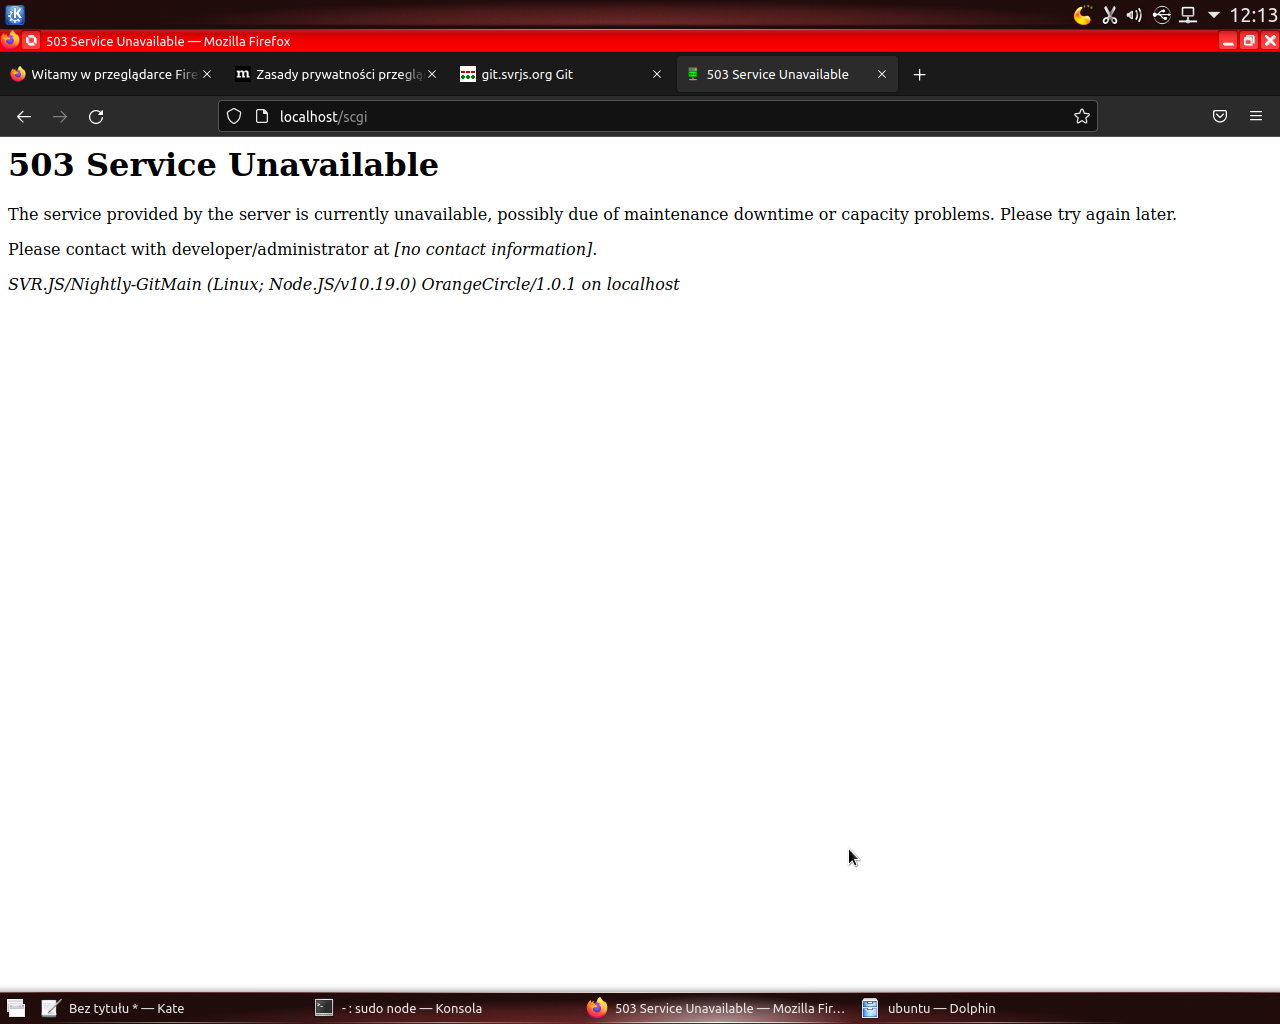 503 Service Unavailable page displayed when trying to connect to SCGI server